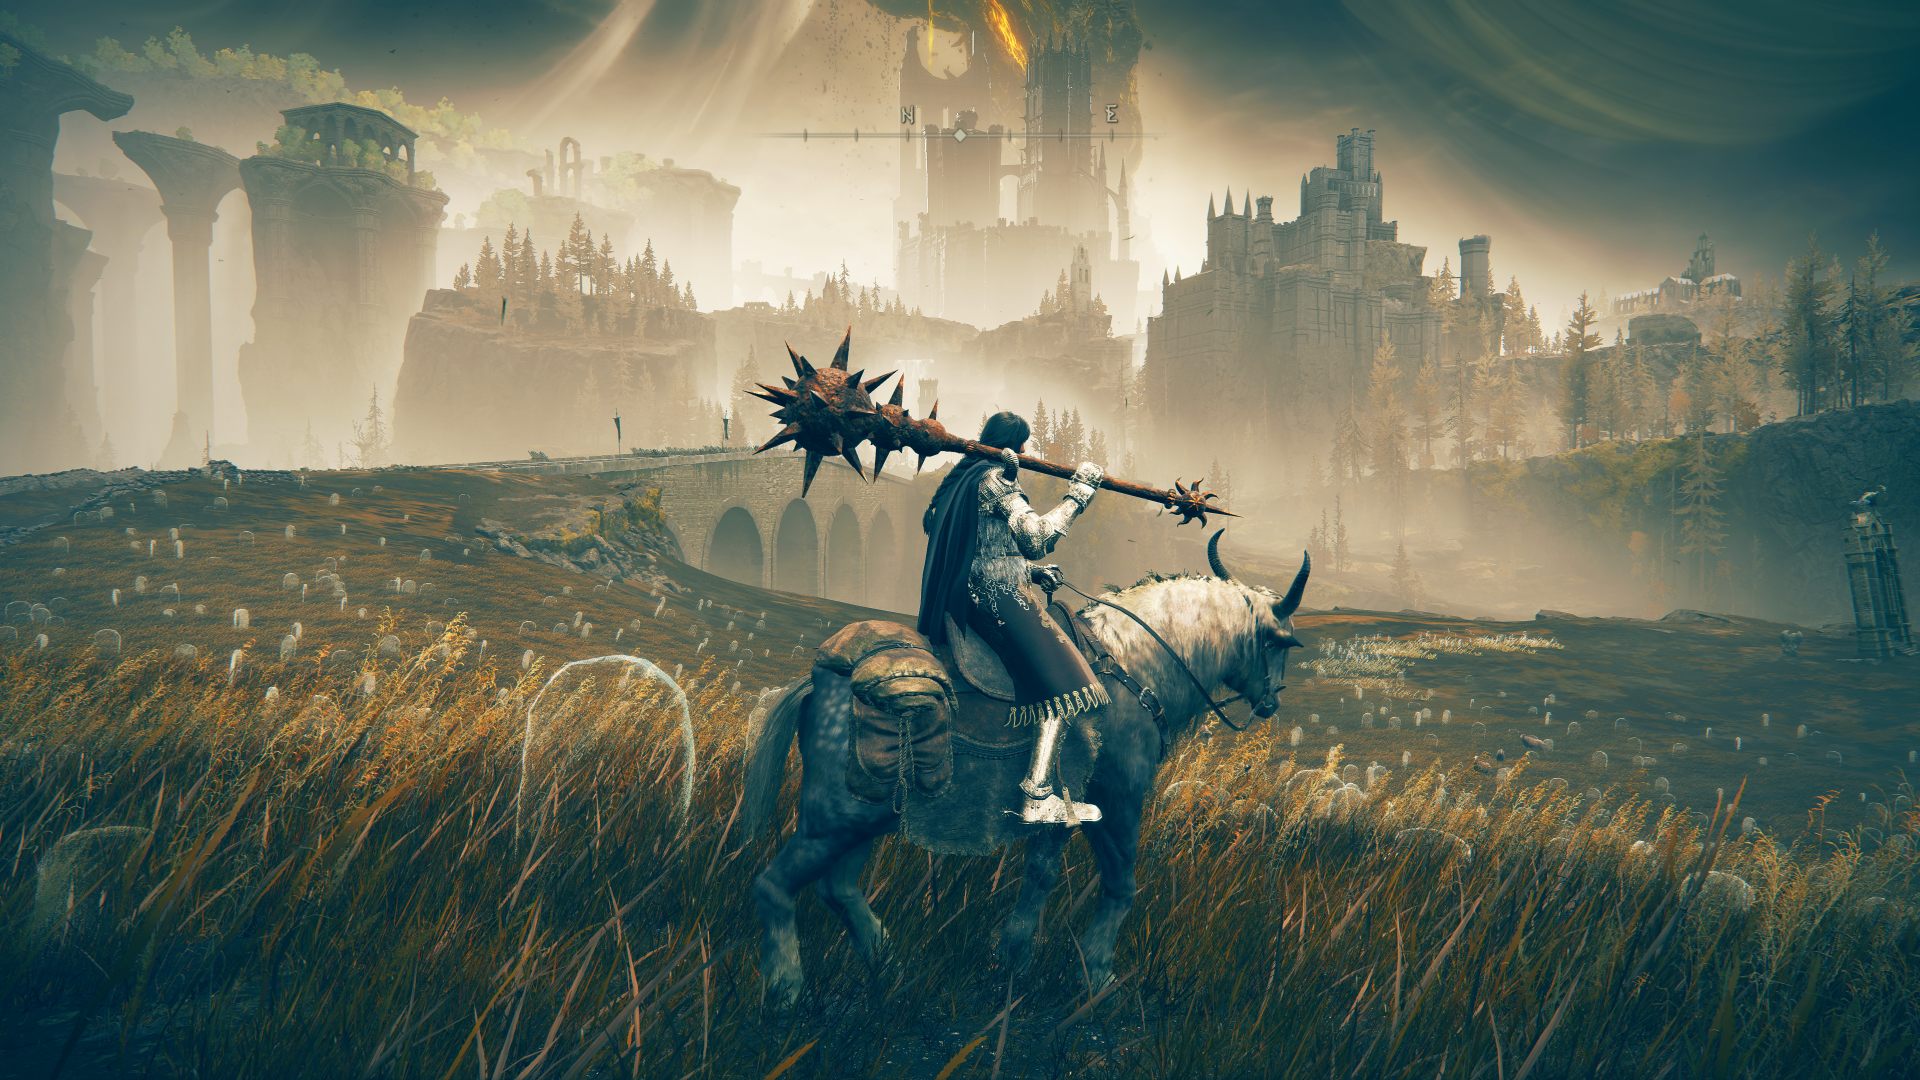 Elden Ring Shadow of the Erdtree screenshot of a character on a horse with a mace and shadowy castles in the background